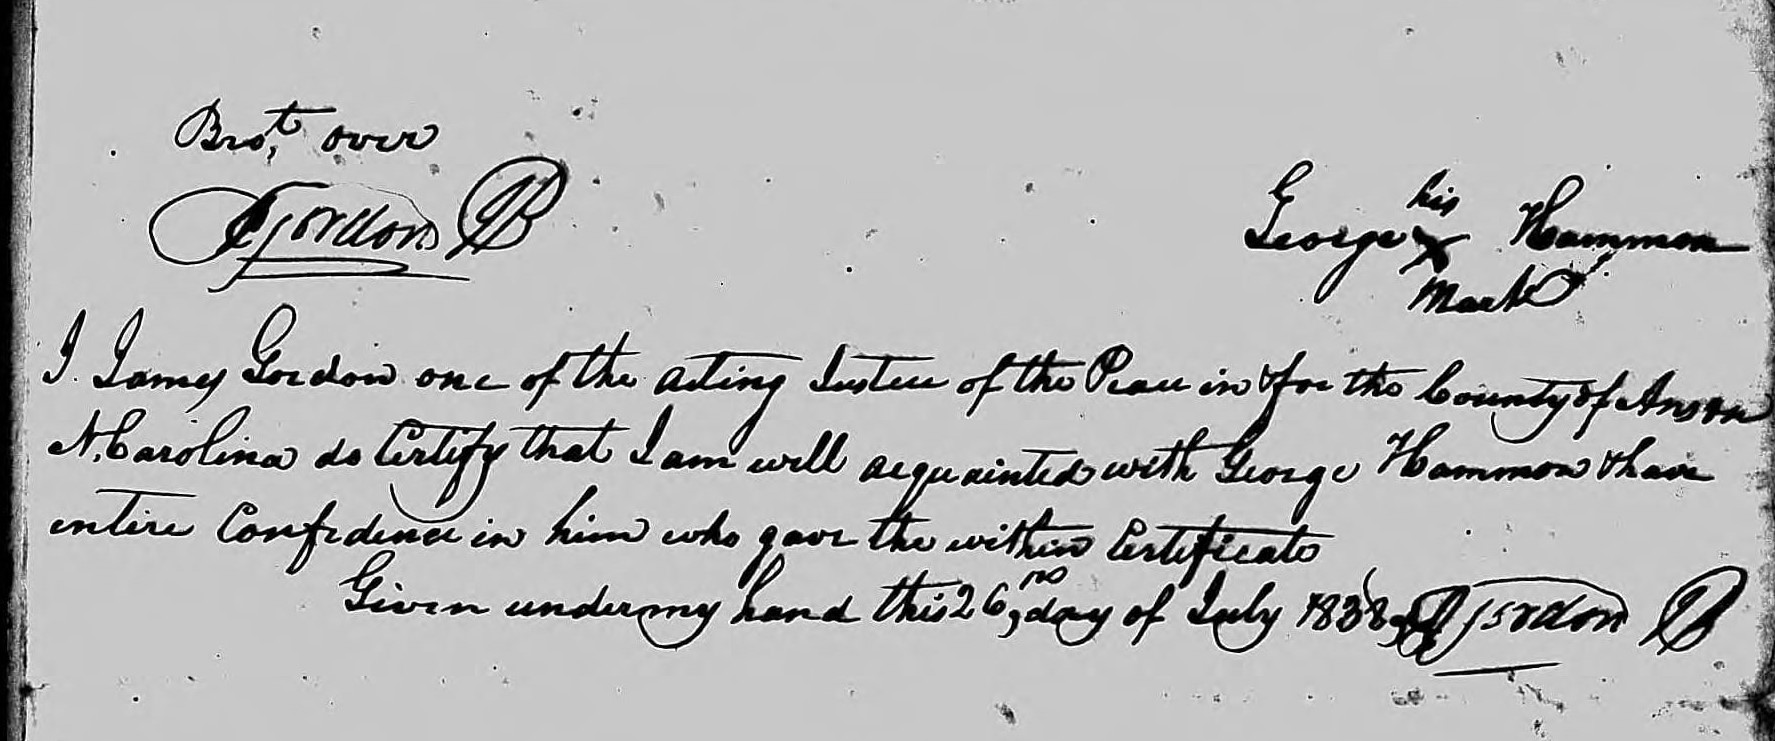 Affidavit of George Hammon in support of a Pension Claim for Huldah Hill, 26 July 1838, page 2